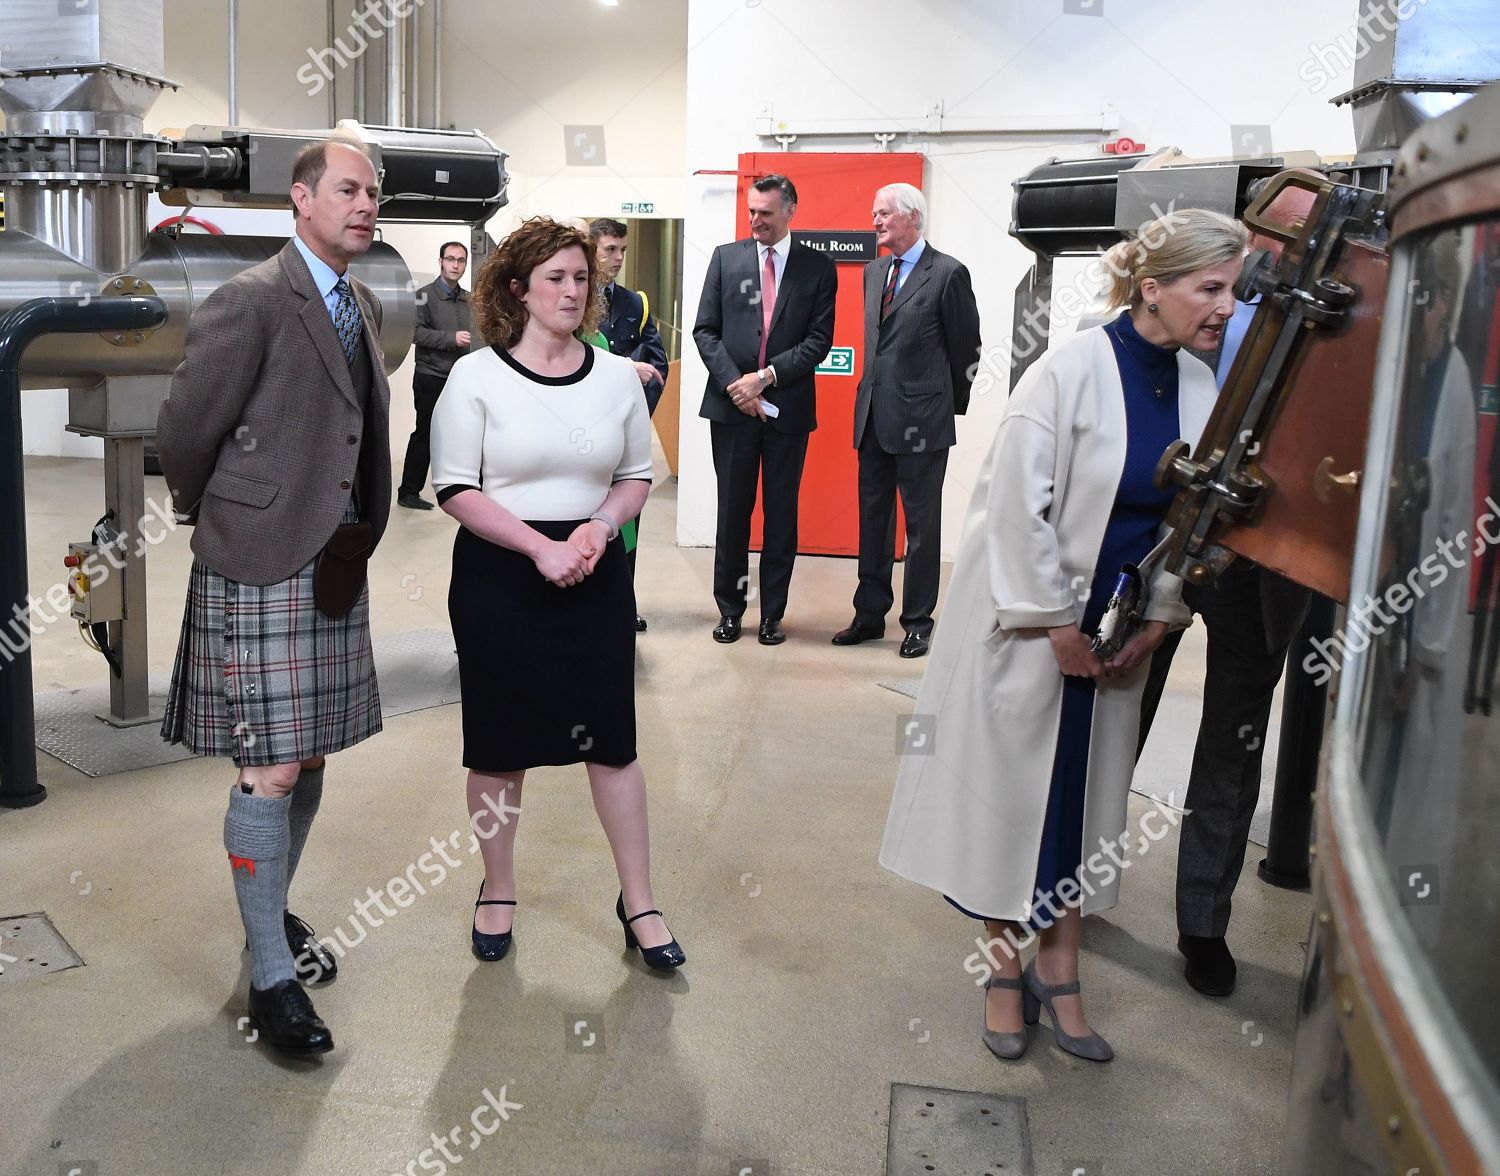 sophie-countess-of-wessex-and-prince-edward-visit-to-scotland-uk-shutterstock-editorial-10326116u.jpg